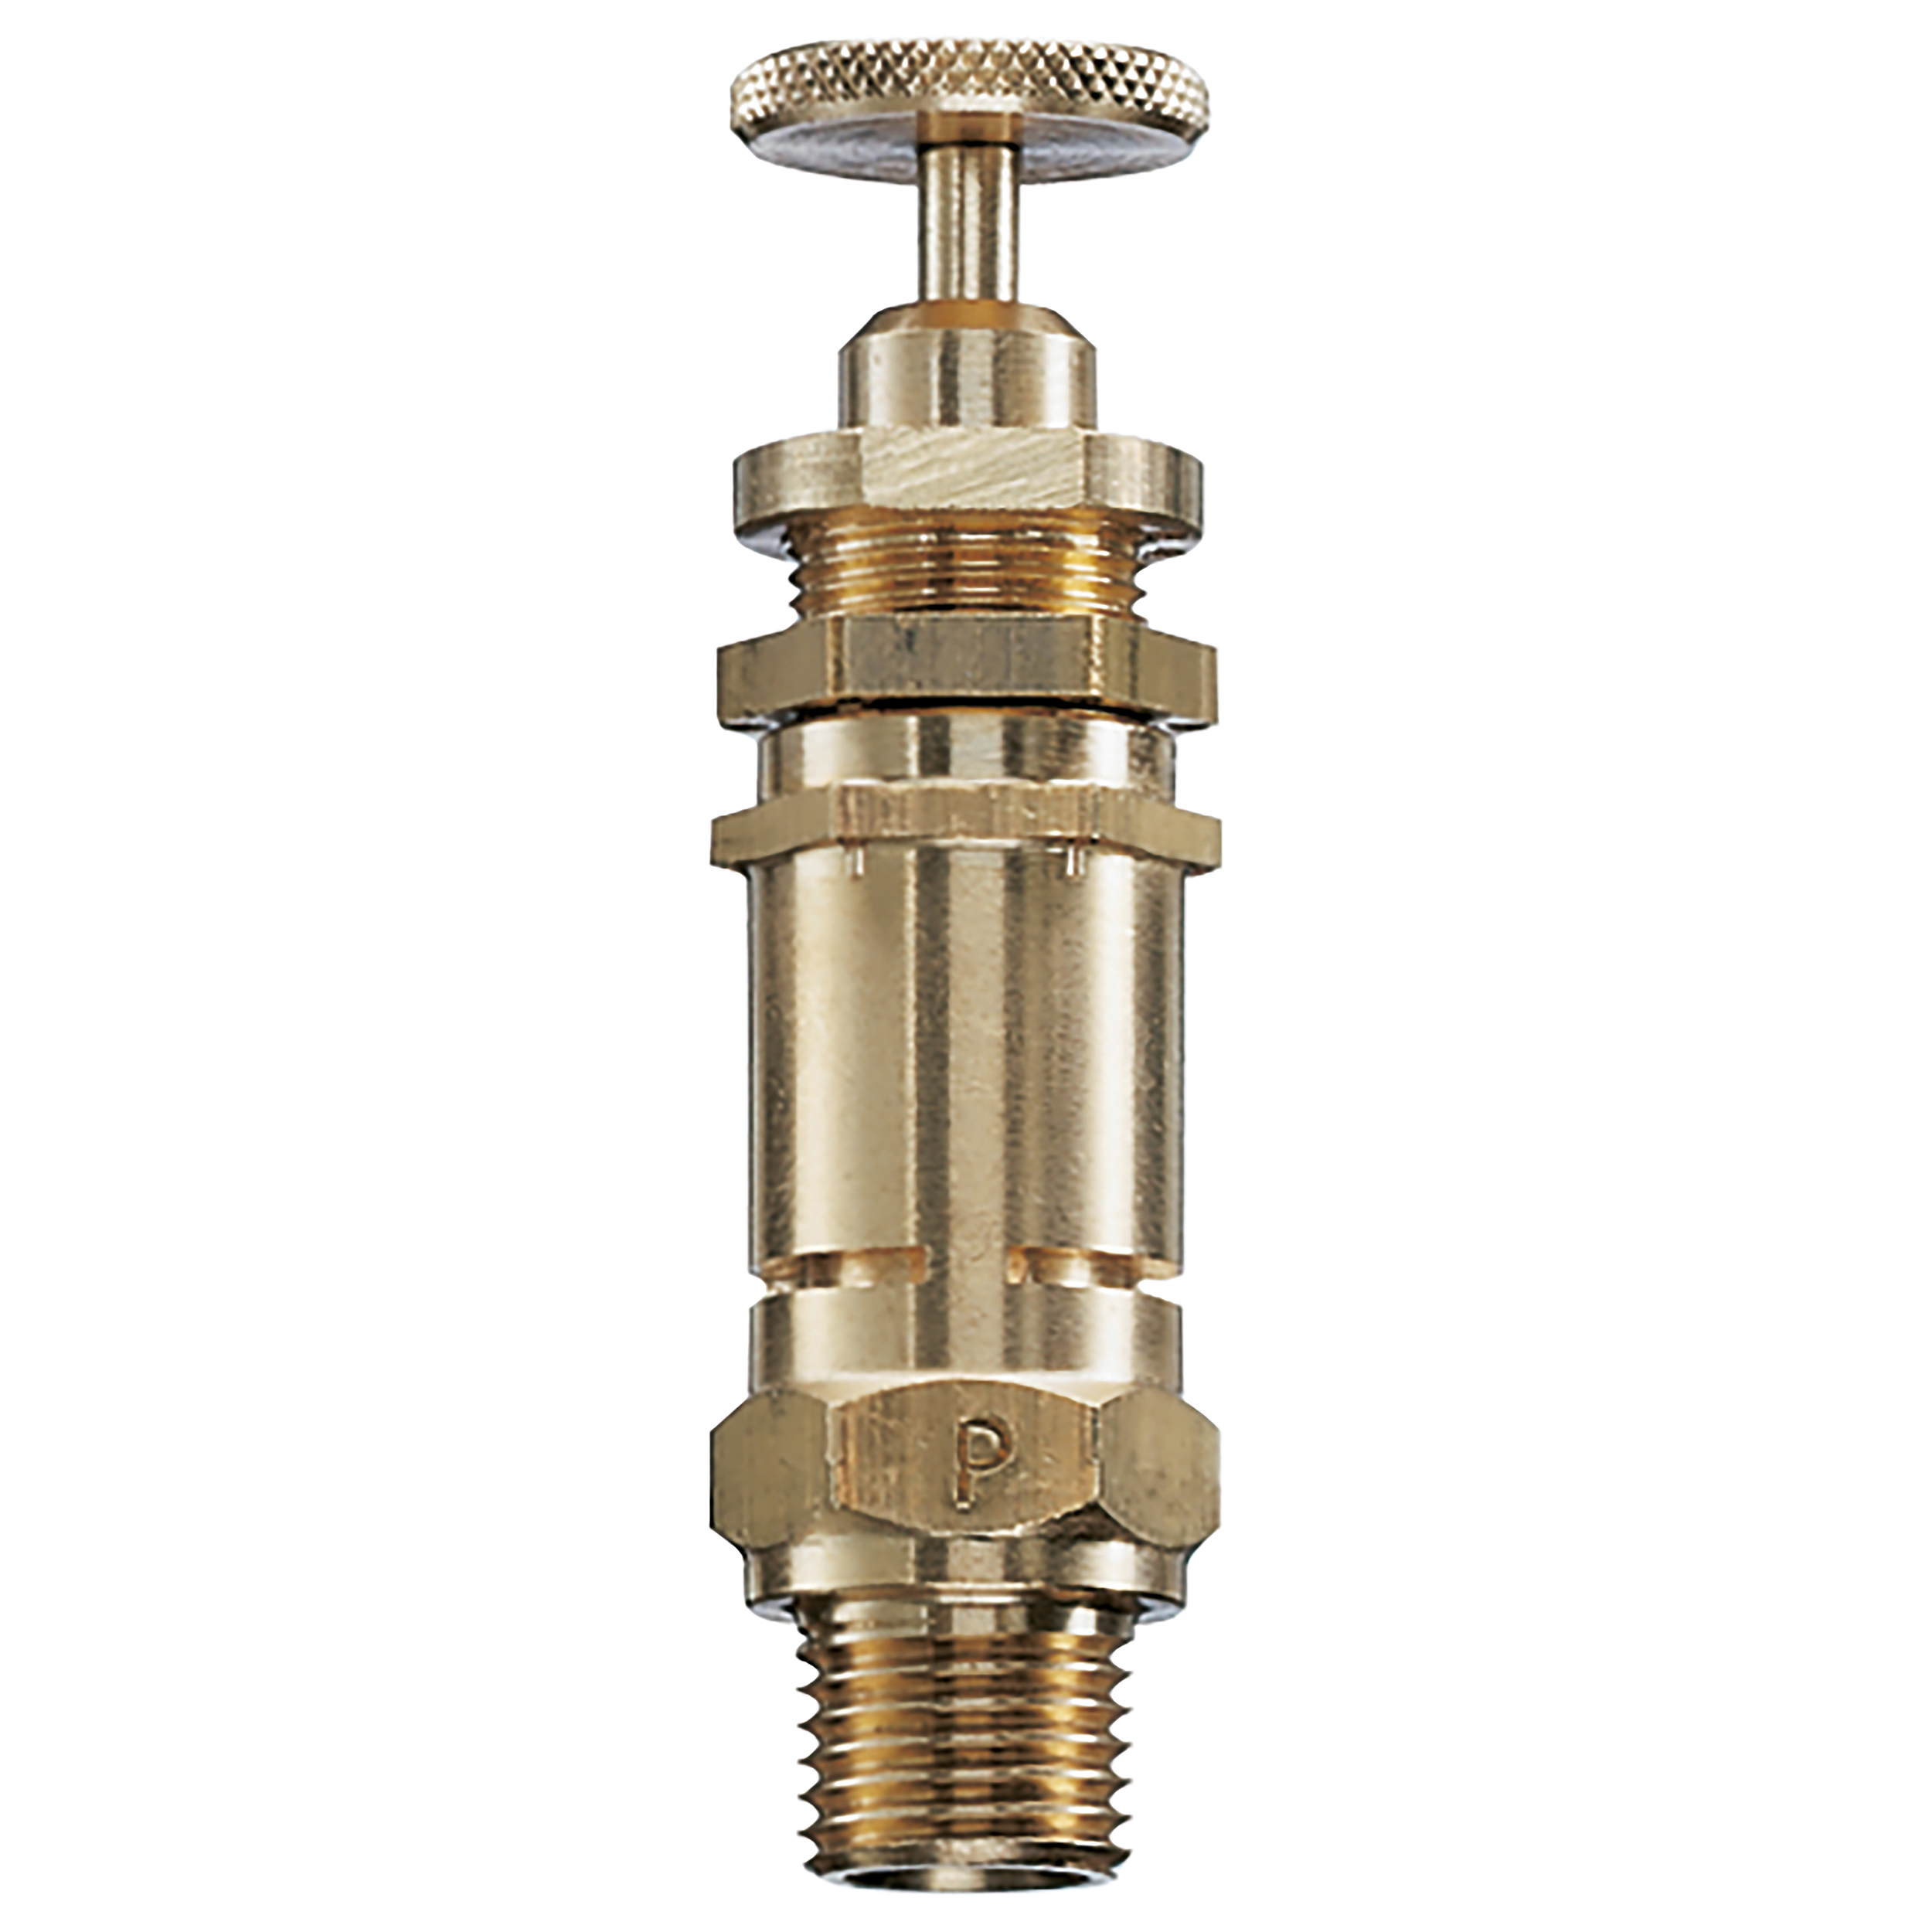 Blow-off valve DN 6, G ¼, set pressure: 2.6 bar (38 psi), seal: NBR, not component tested